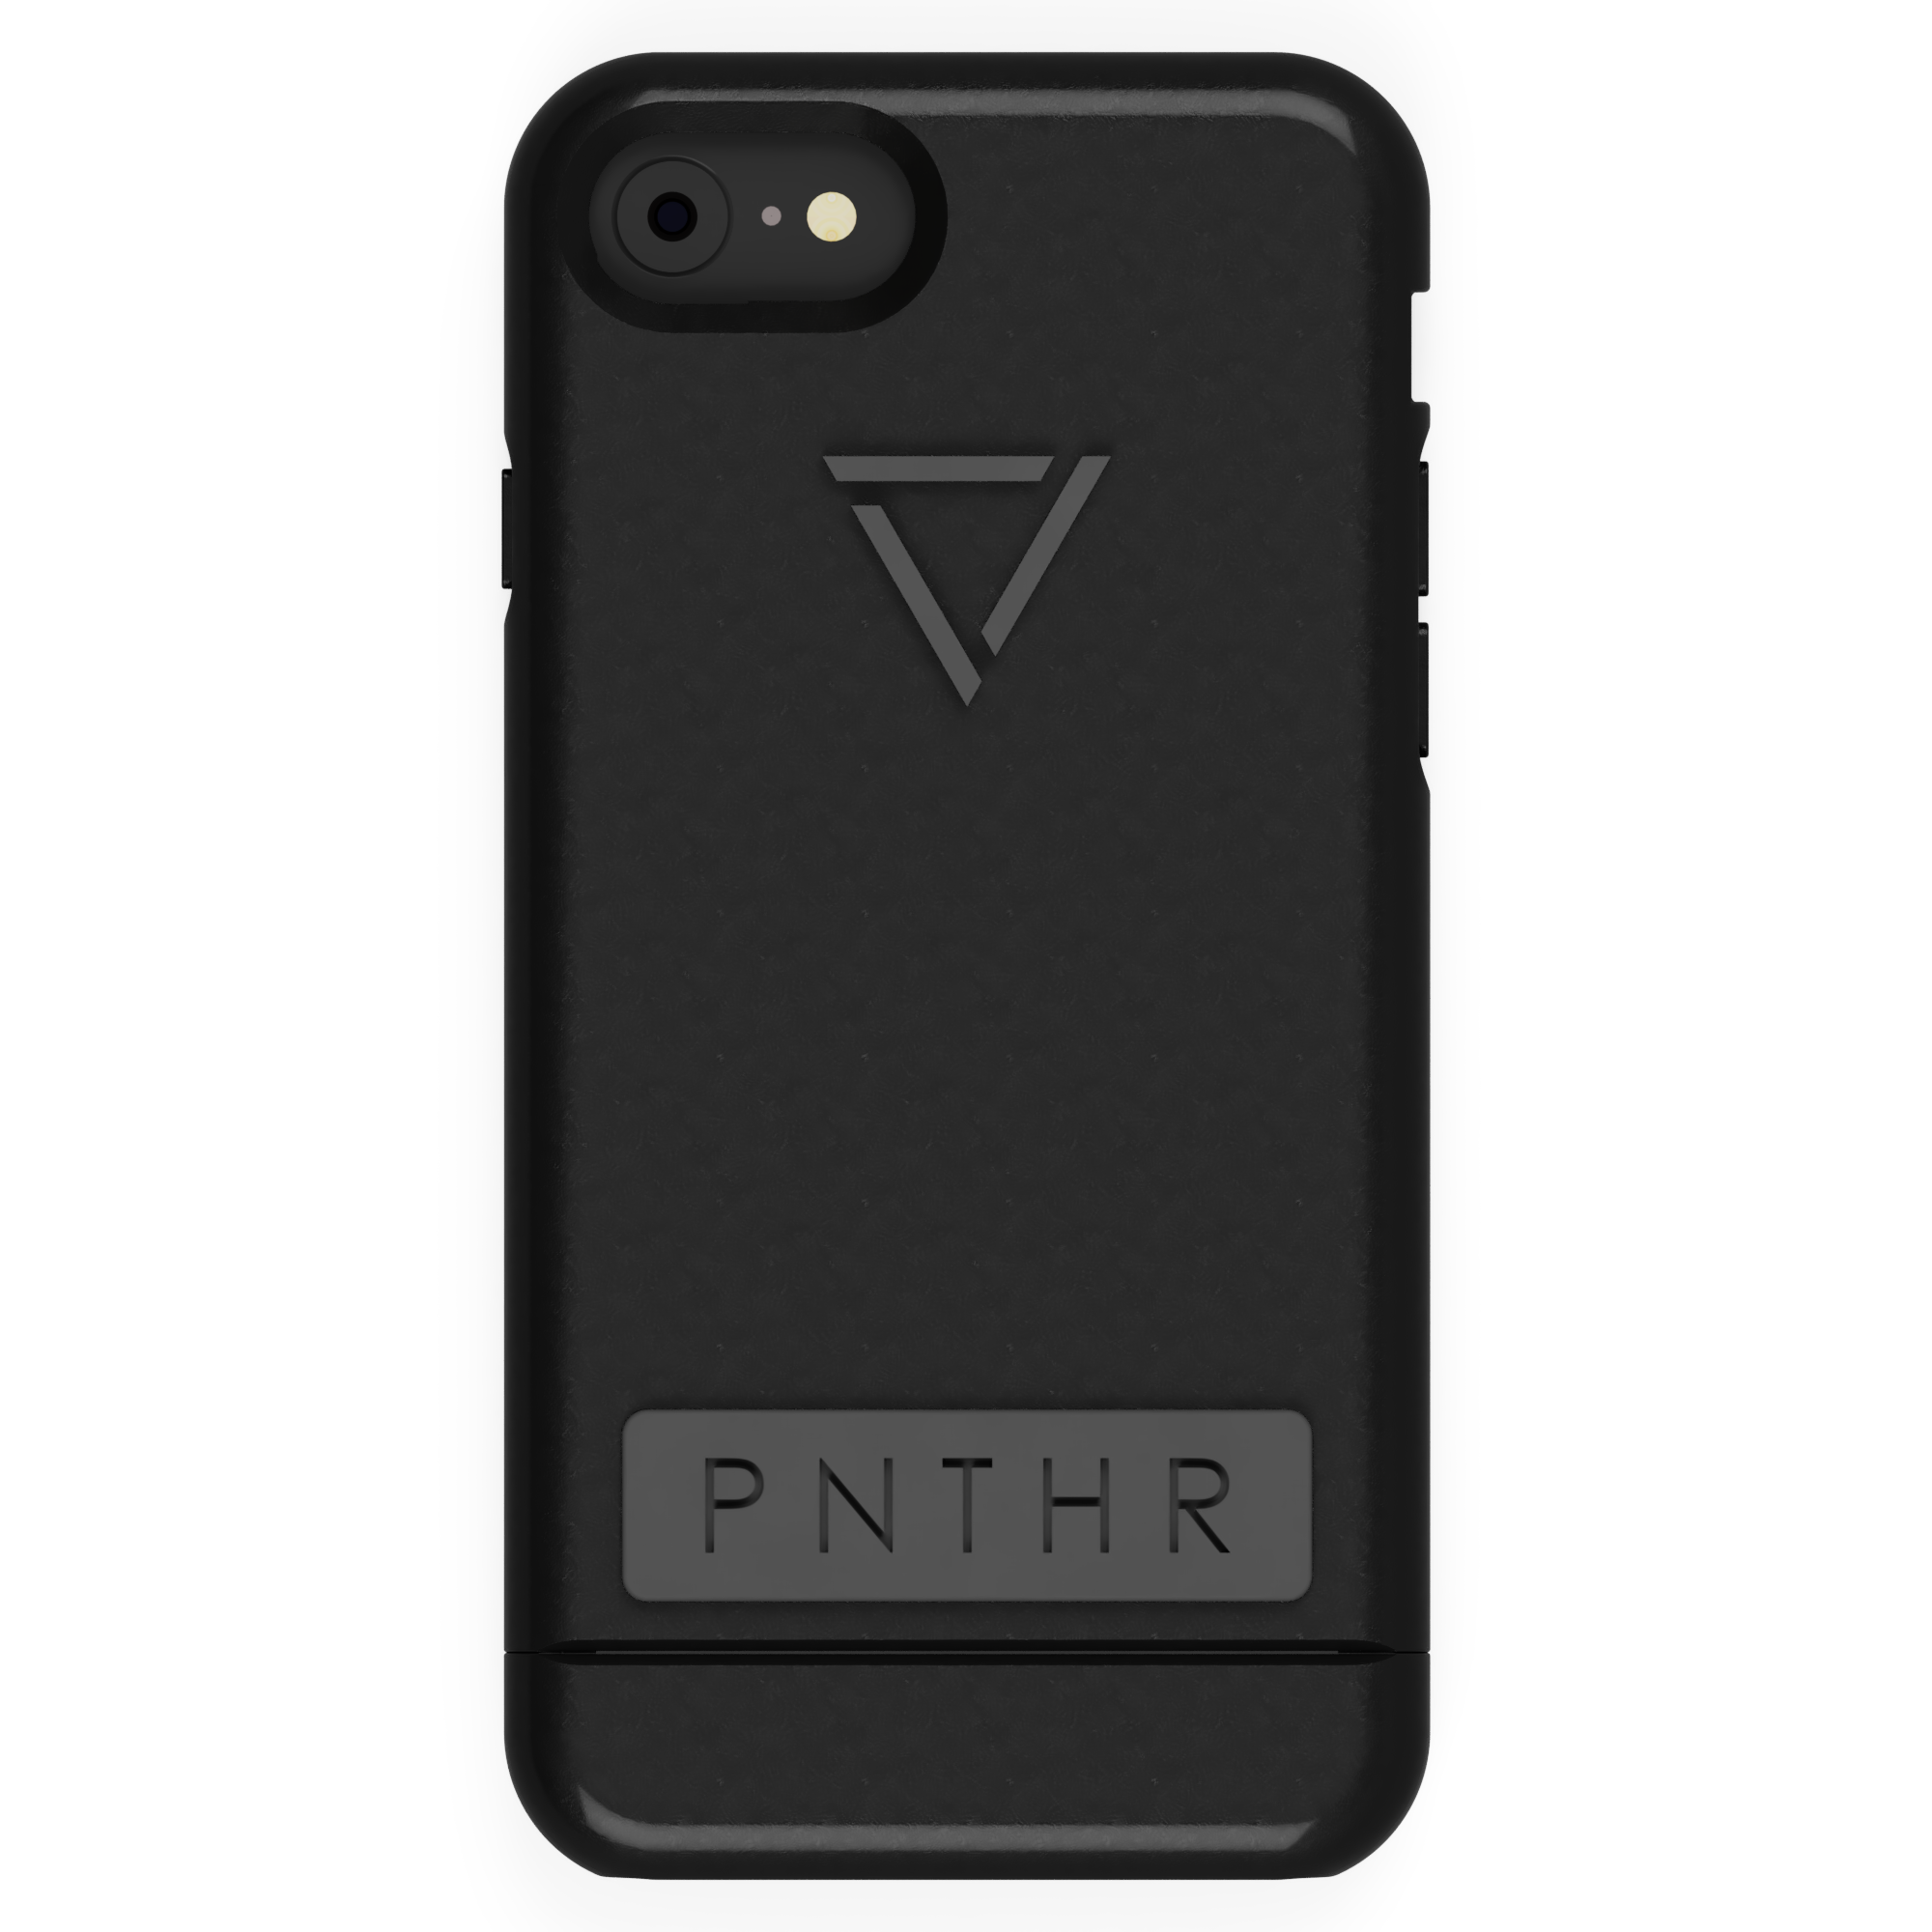 pnthr rear.png